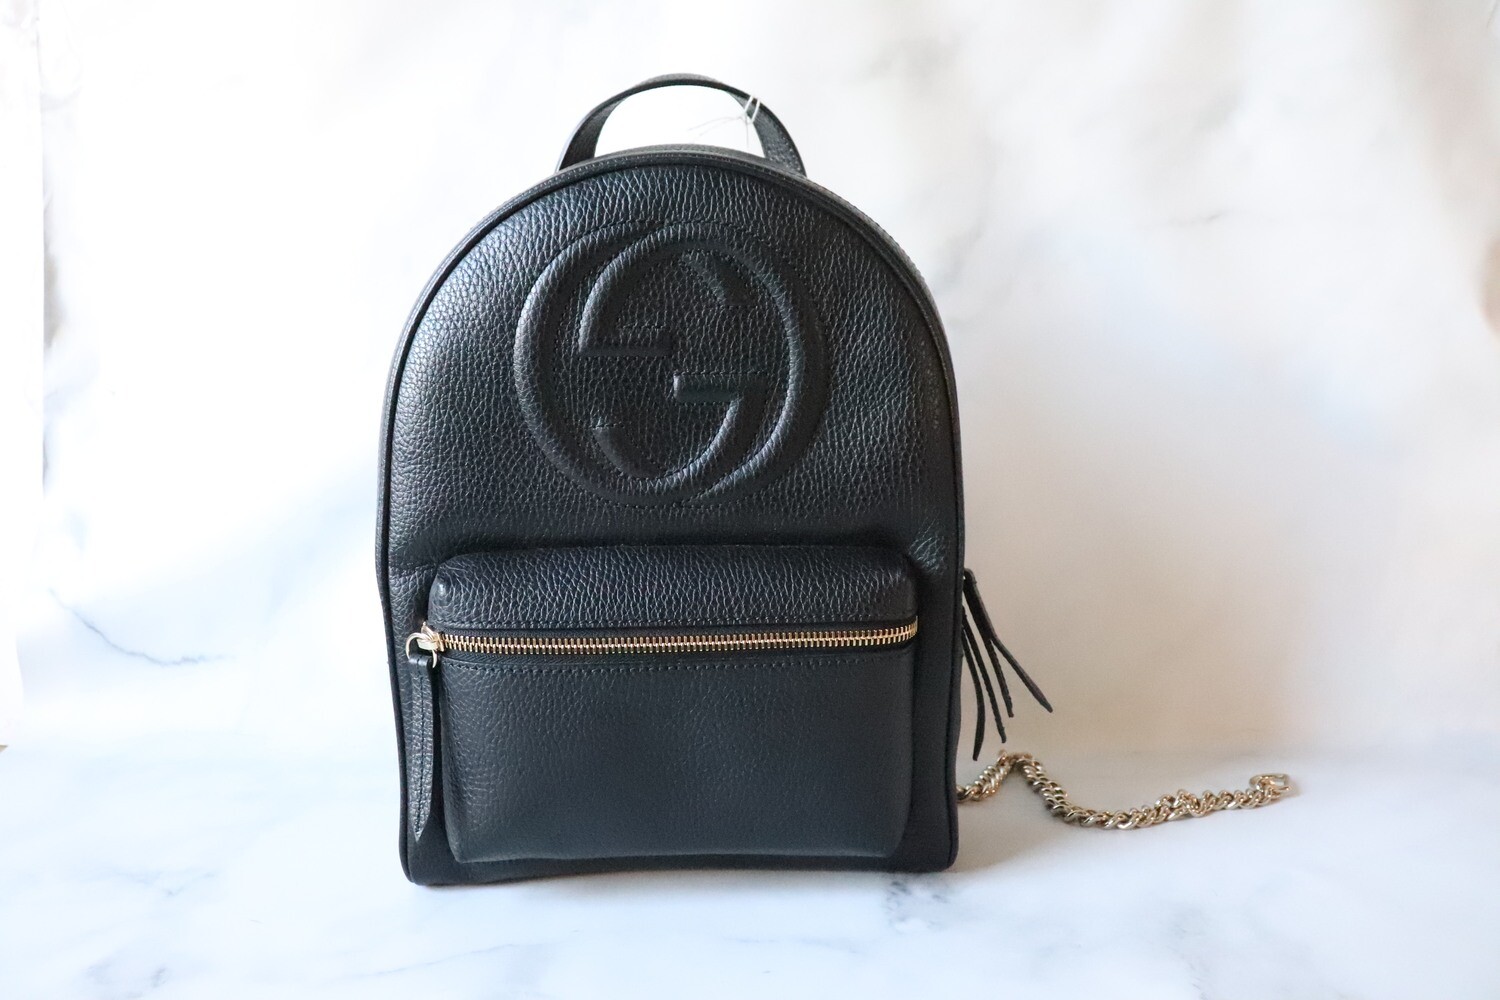 Gucci Backpack Soho, Black, Silver Hardware, New in Dustbag